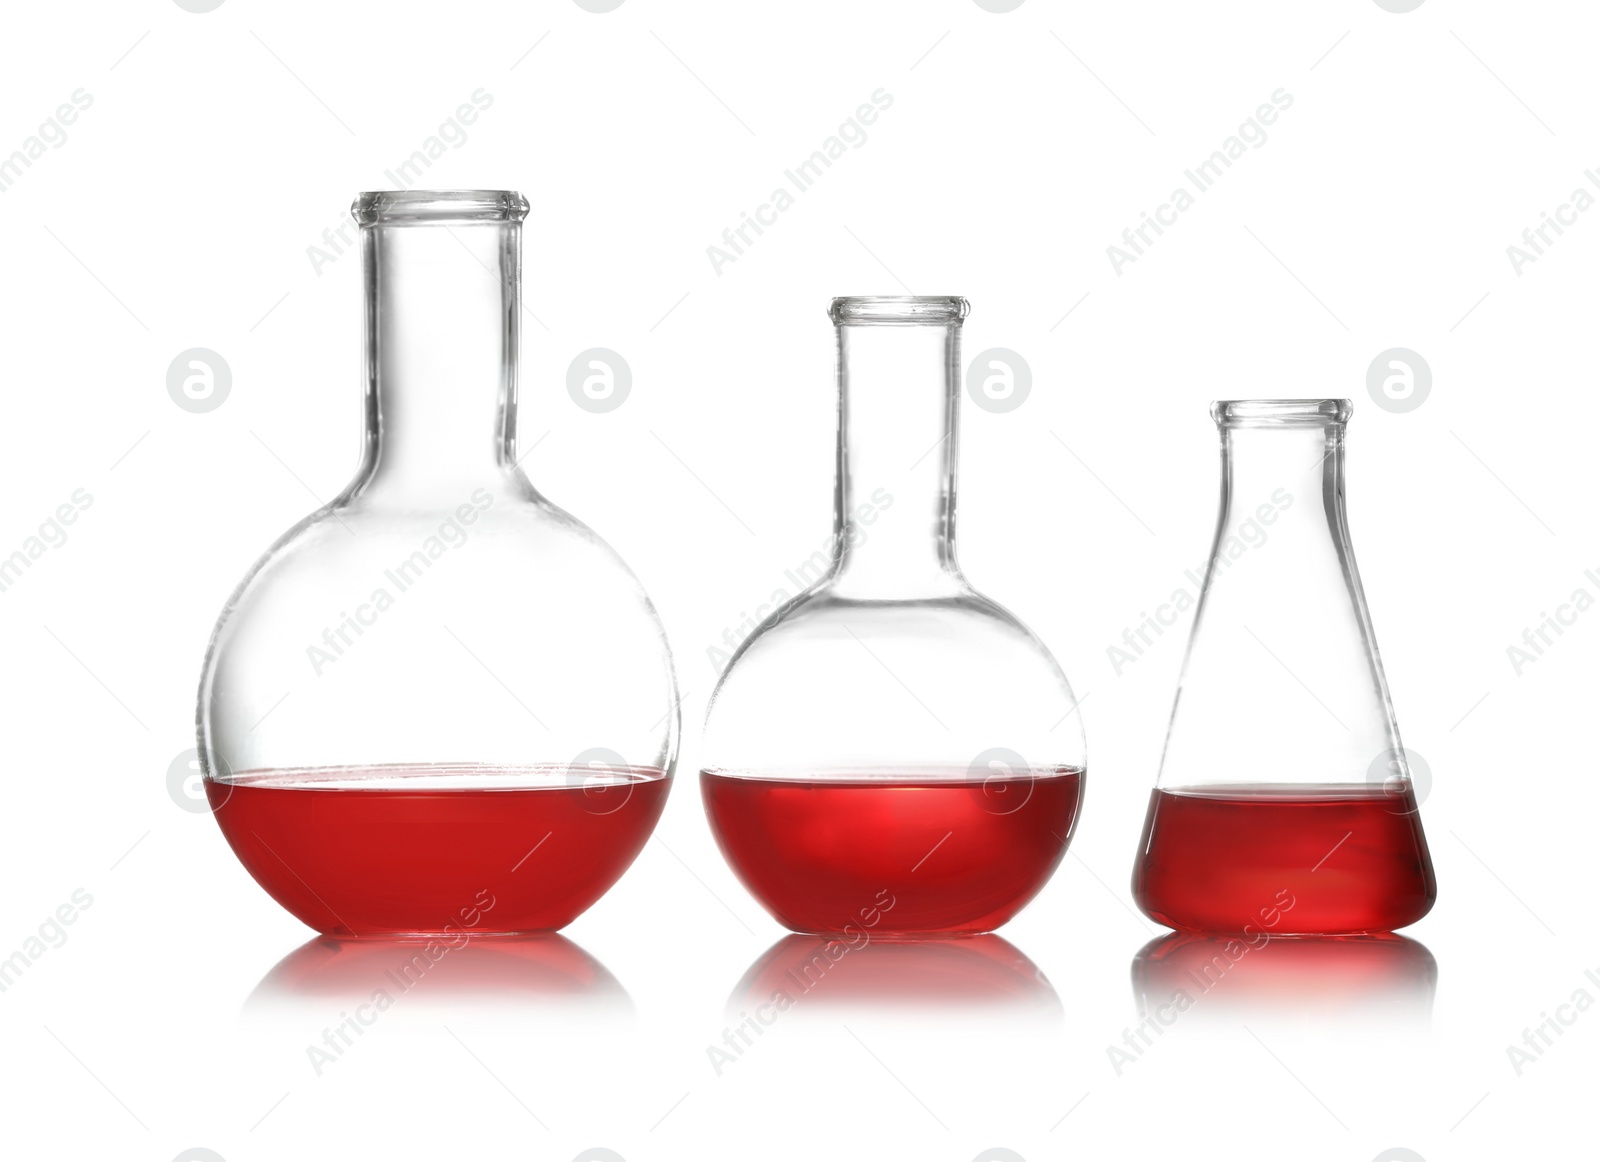 Photo of Group of chemistry glassware with liquid samples isolated on white